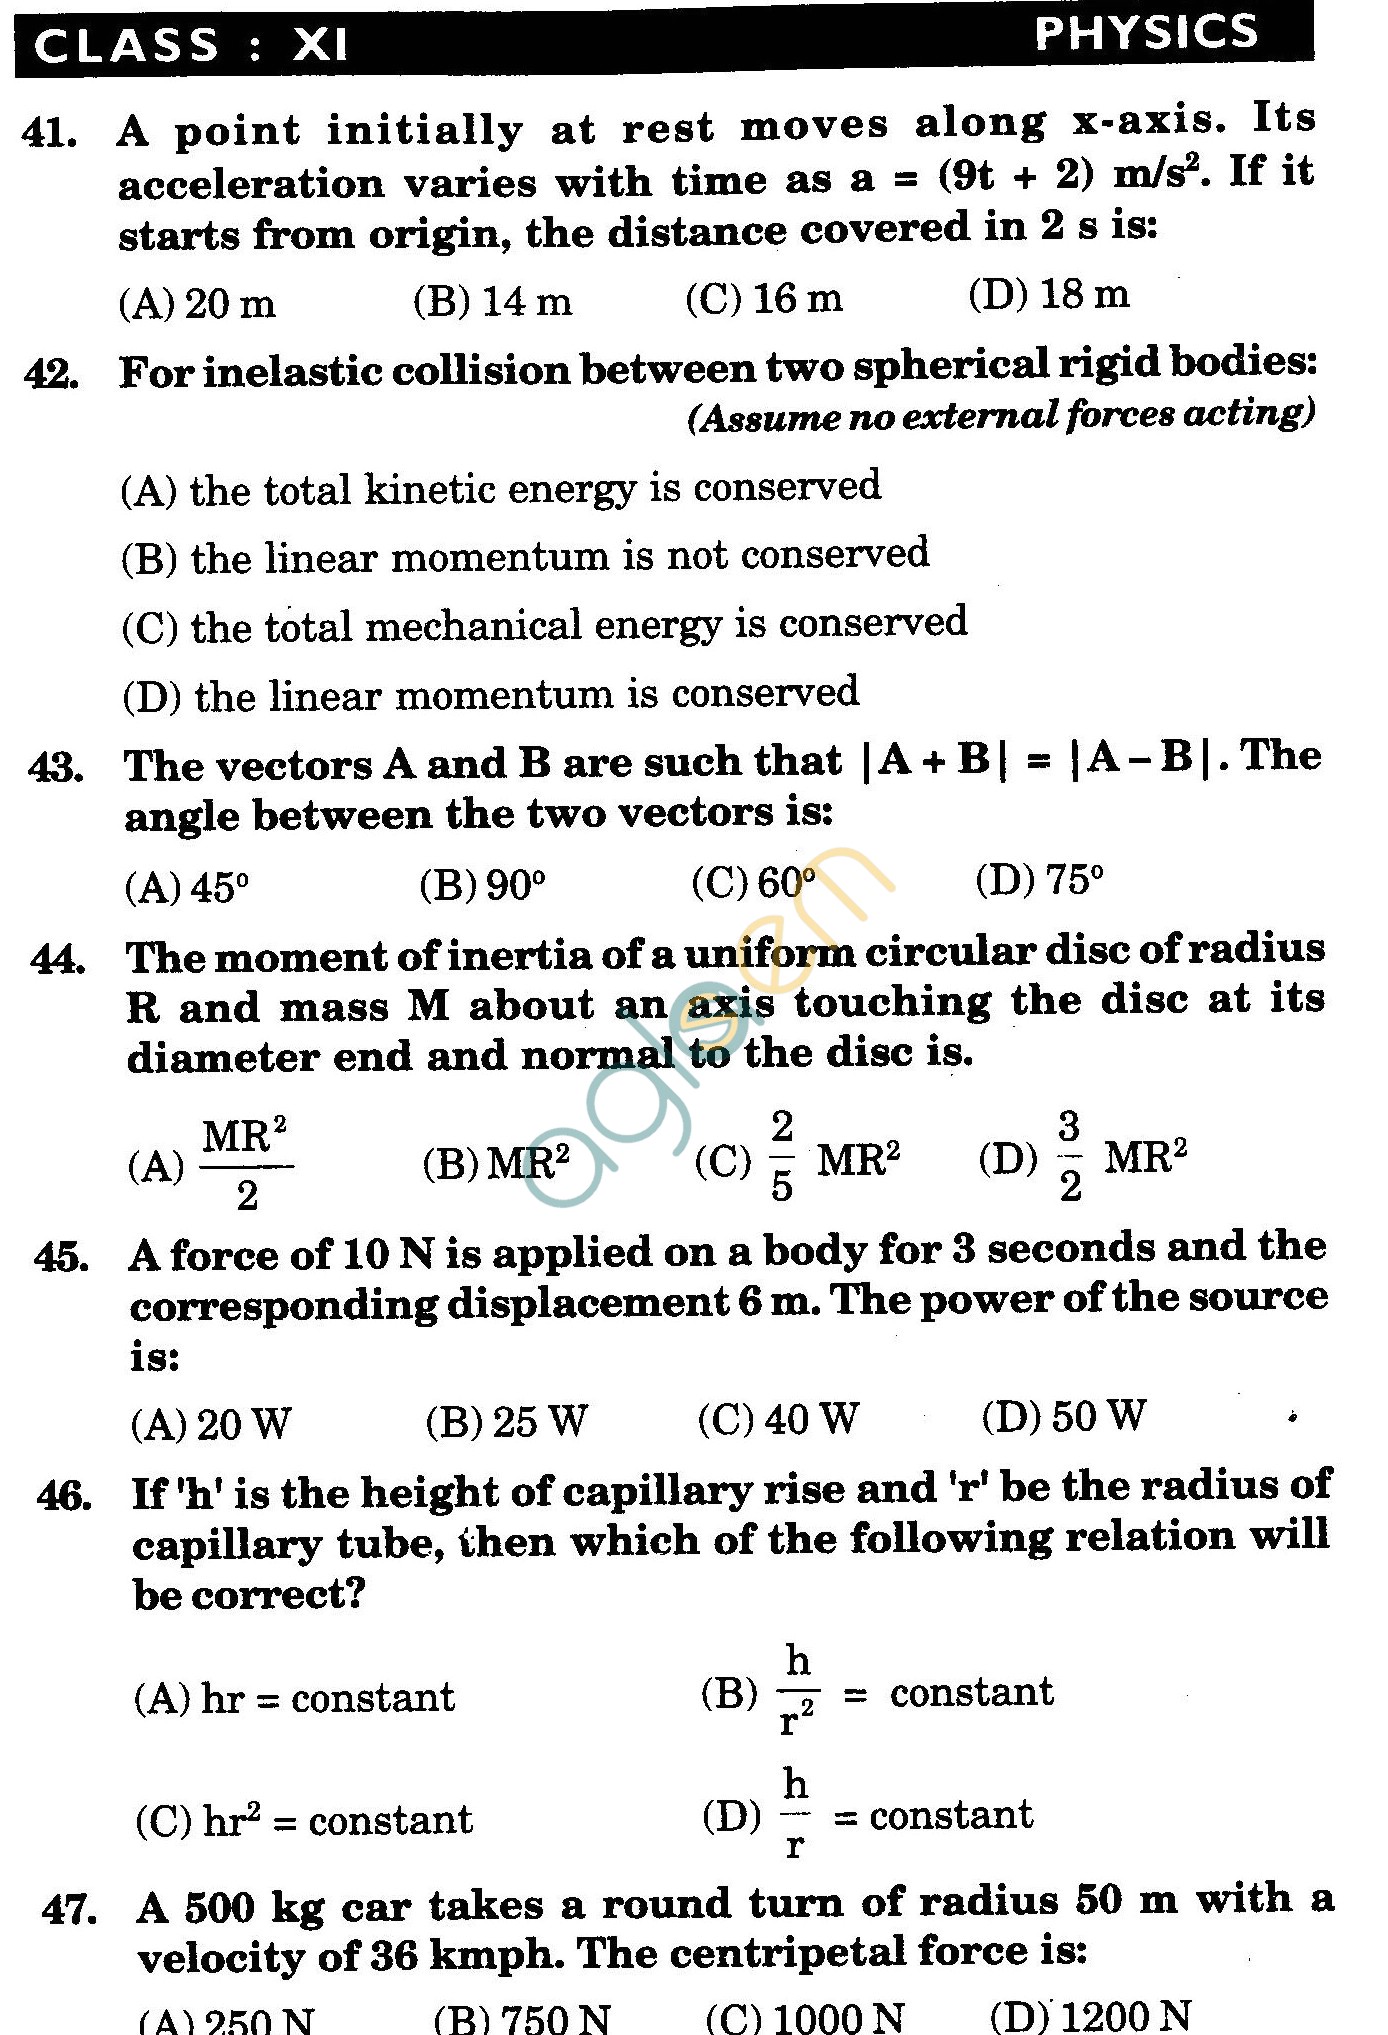 NSTSE 2009 Class XI PCB Question Paper with Answers - Physics